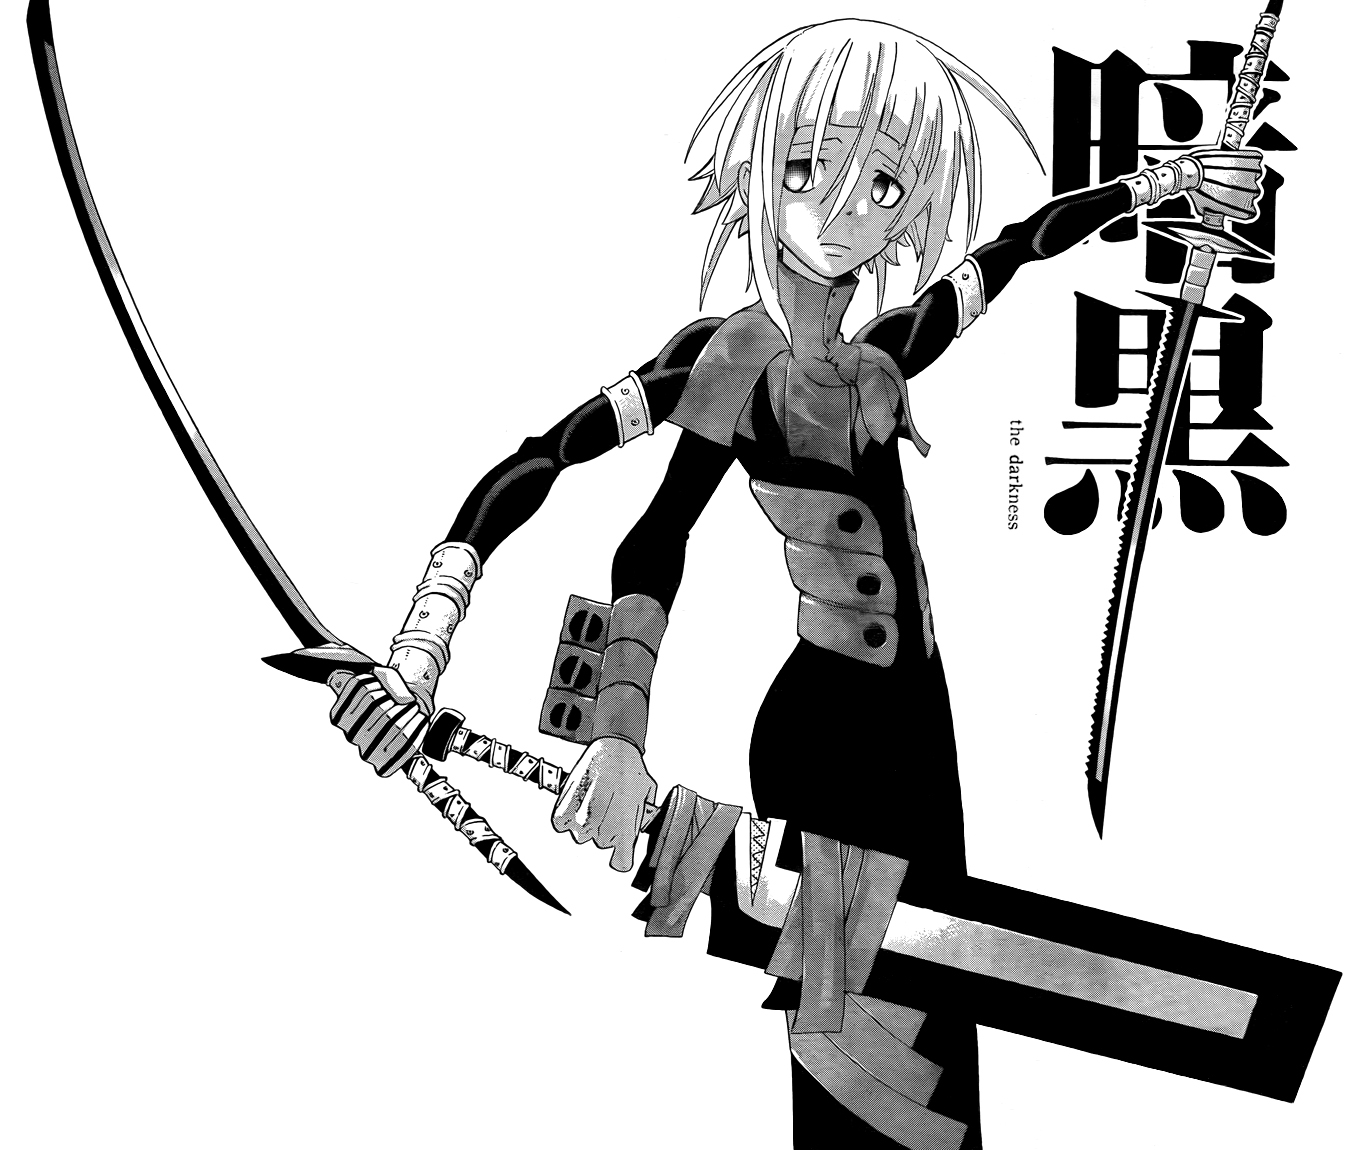 http://images2.wikia.nocookie.net/__cb20091215172159/souleater/images/e/ed/Crona_armor.jpg